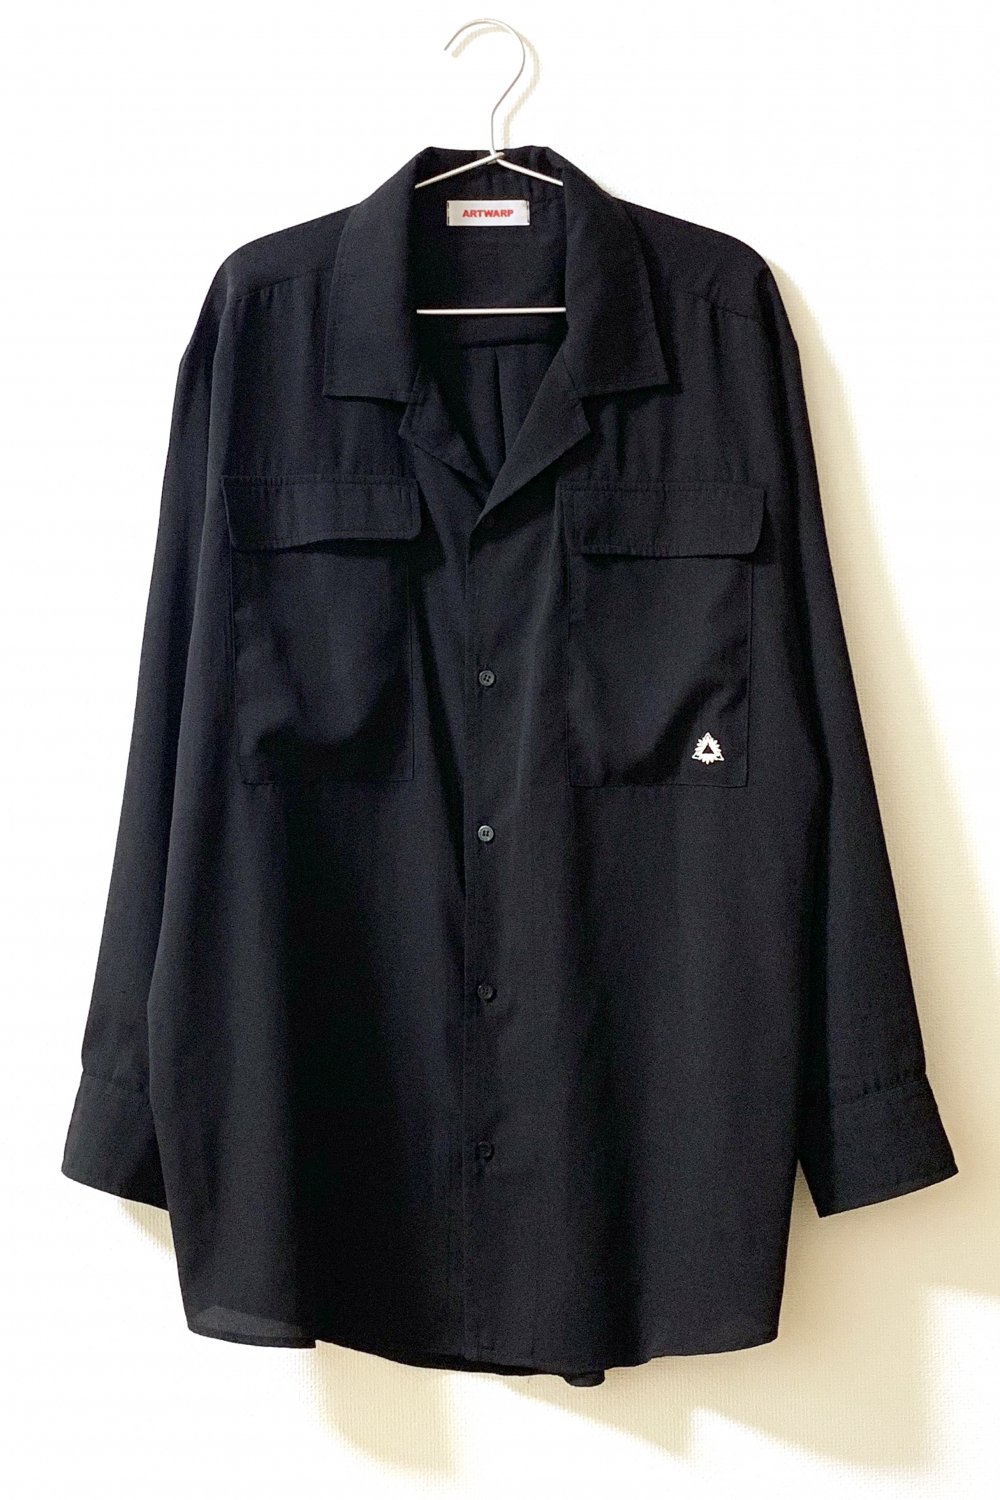 BIG WORK SHIRT <img class='new_mark_img2' src='https://img.shop-pro.jp/img/new/icons15.gif' style='border:none;display:inline;margin:0px;padding:0px;width:auto;' />